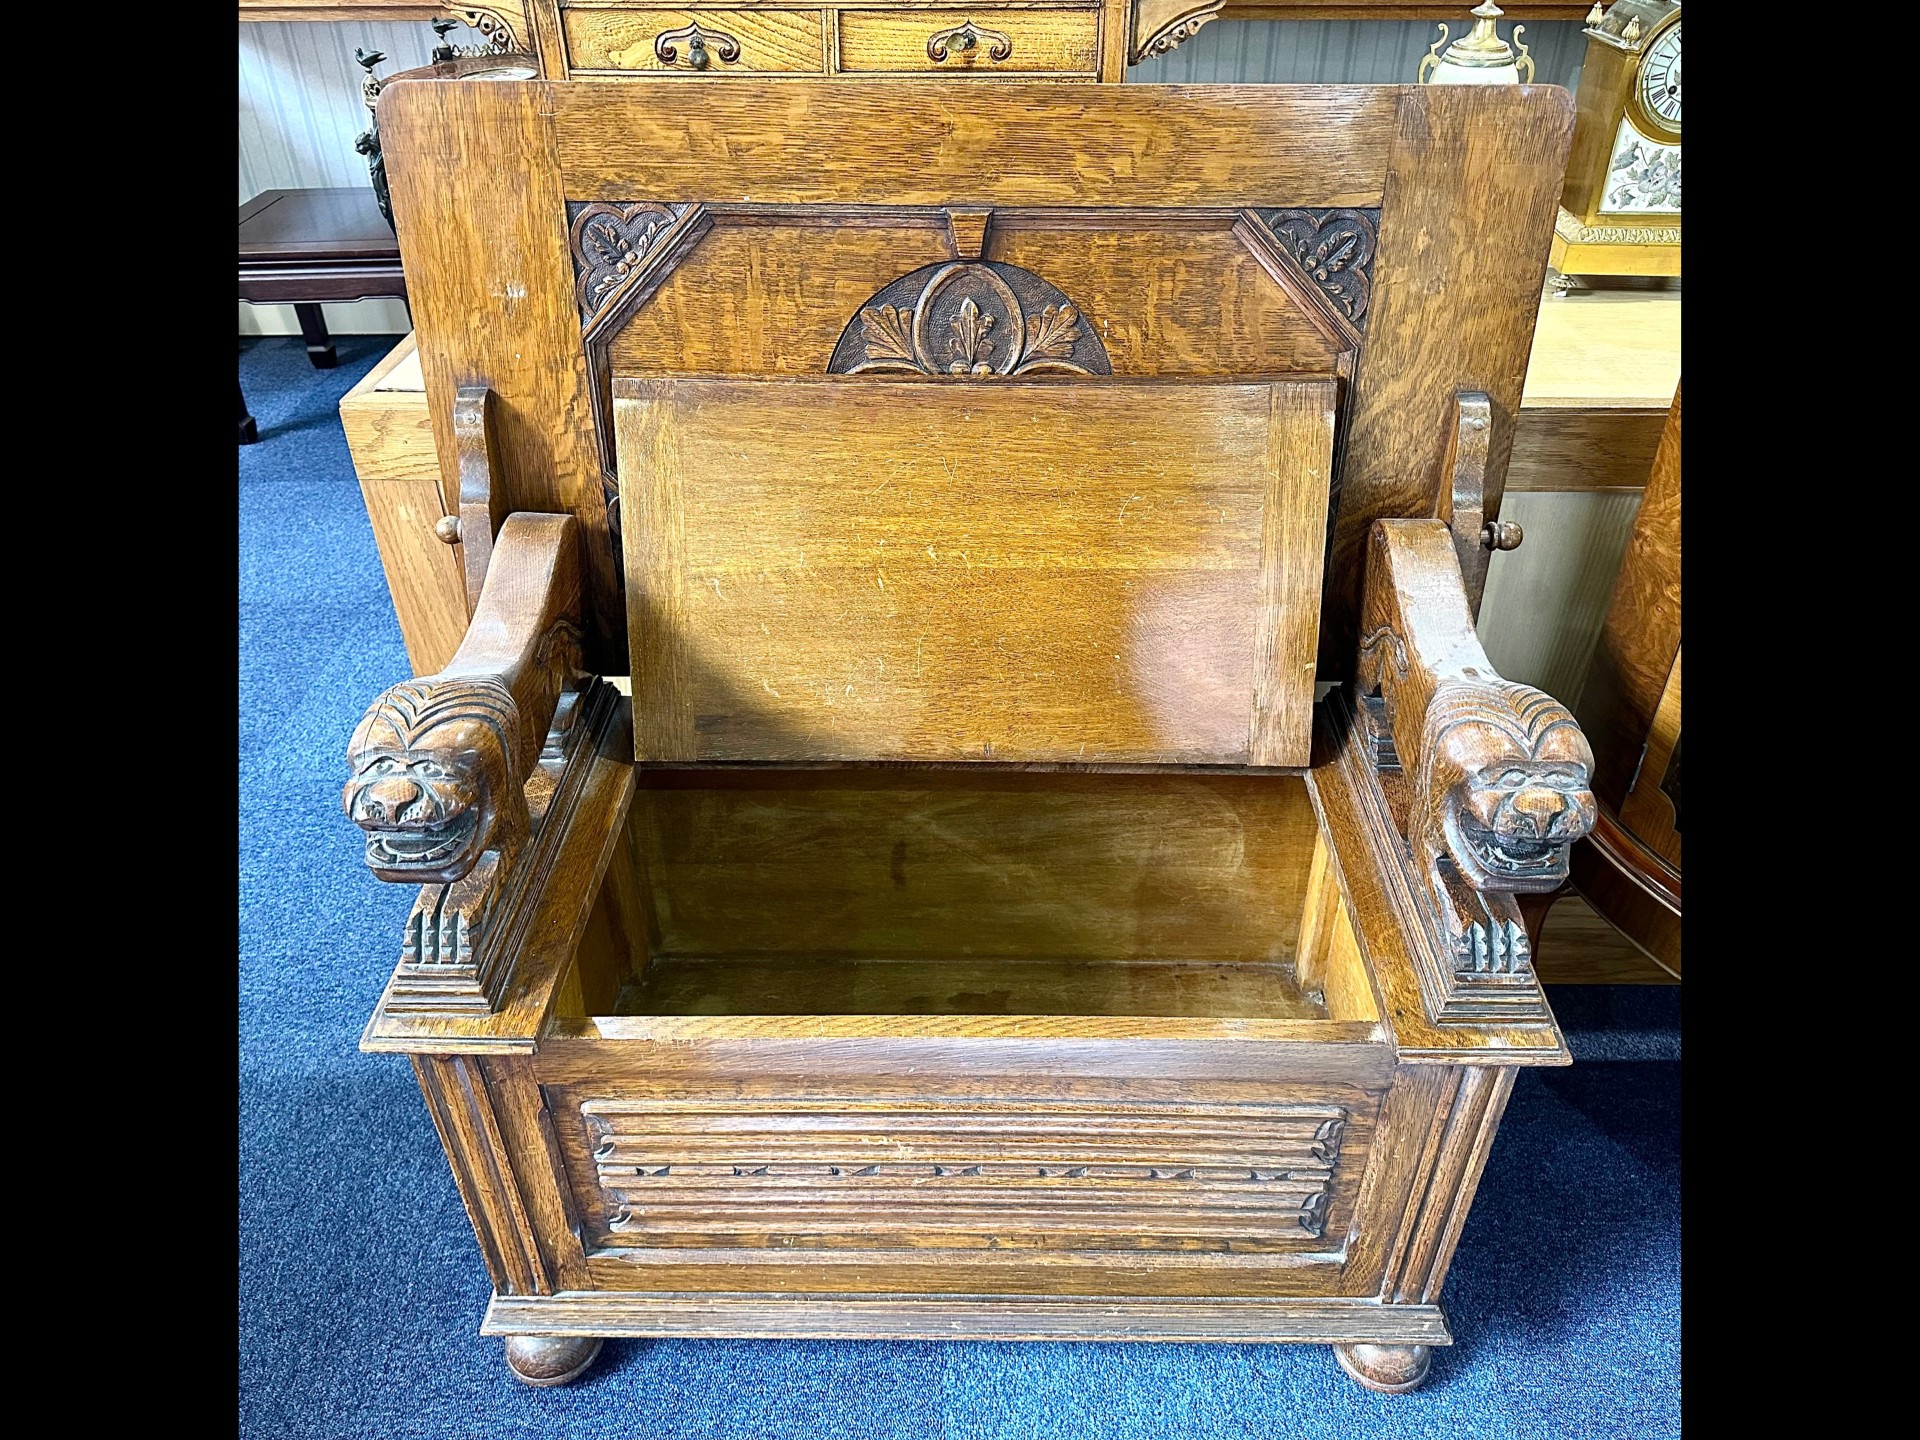 Early 20th Century Oak Monk's Bench with fold over back rest, lion carved arm rests, hinged seat and - Image 4 of 5